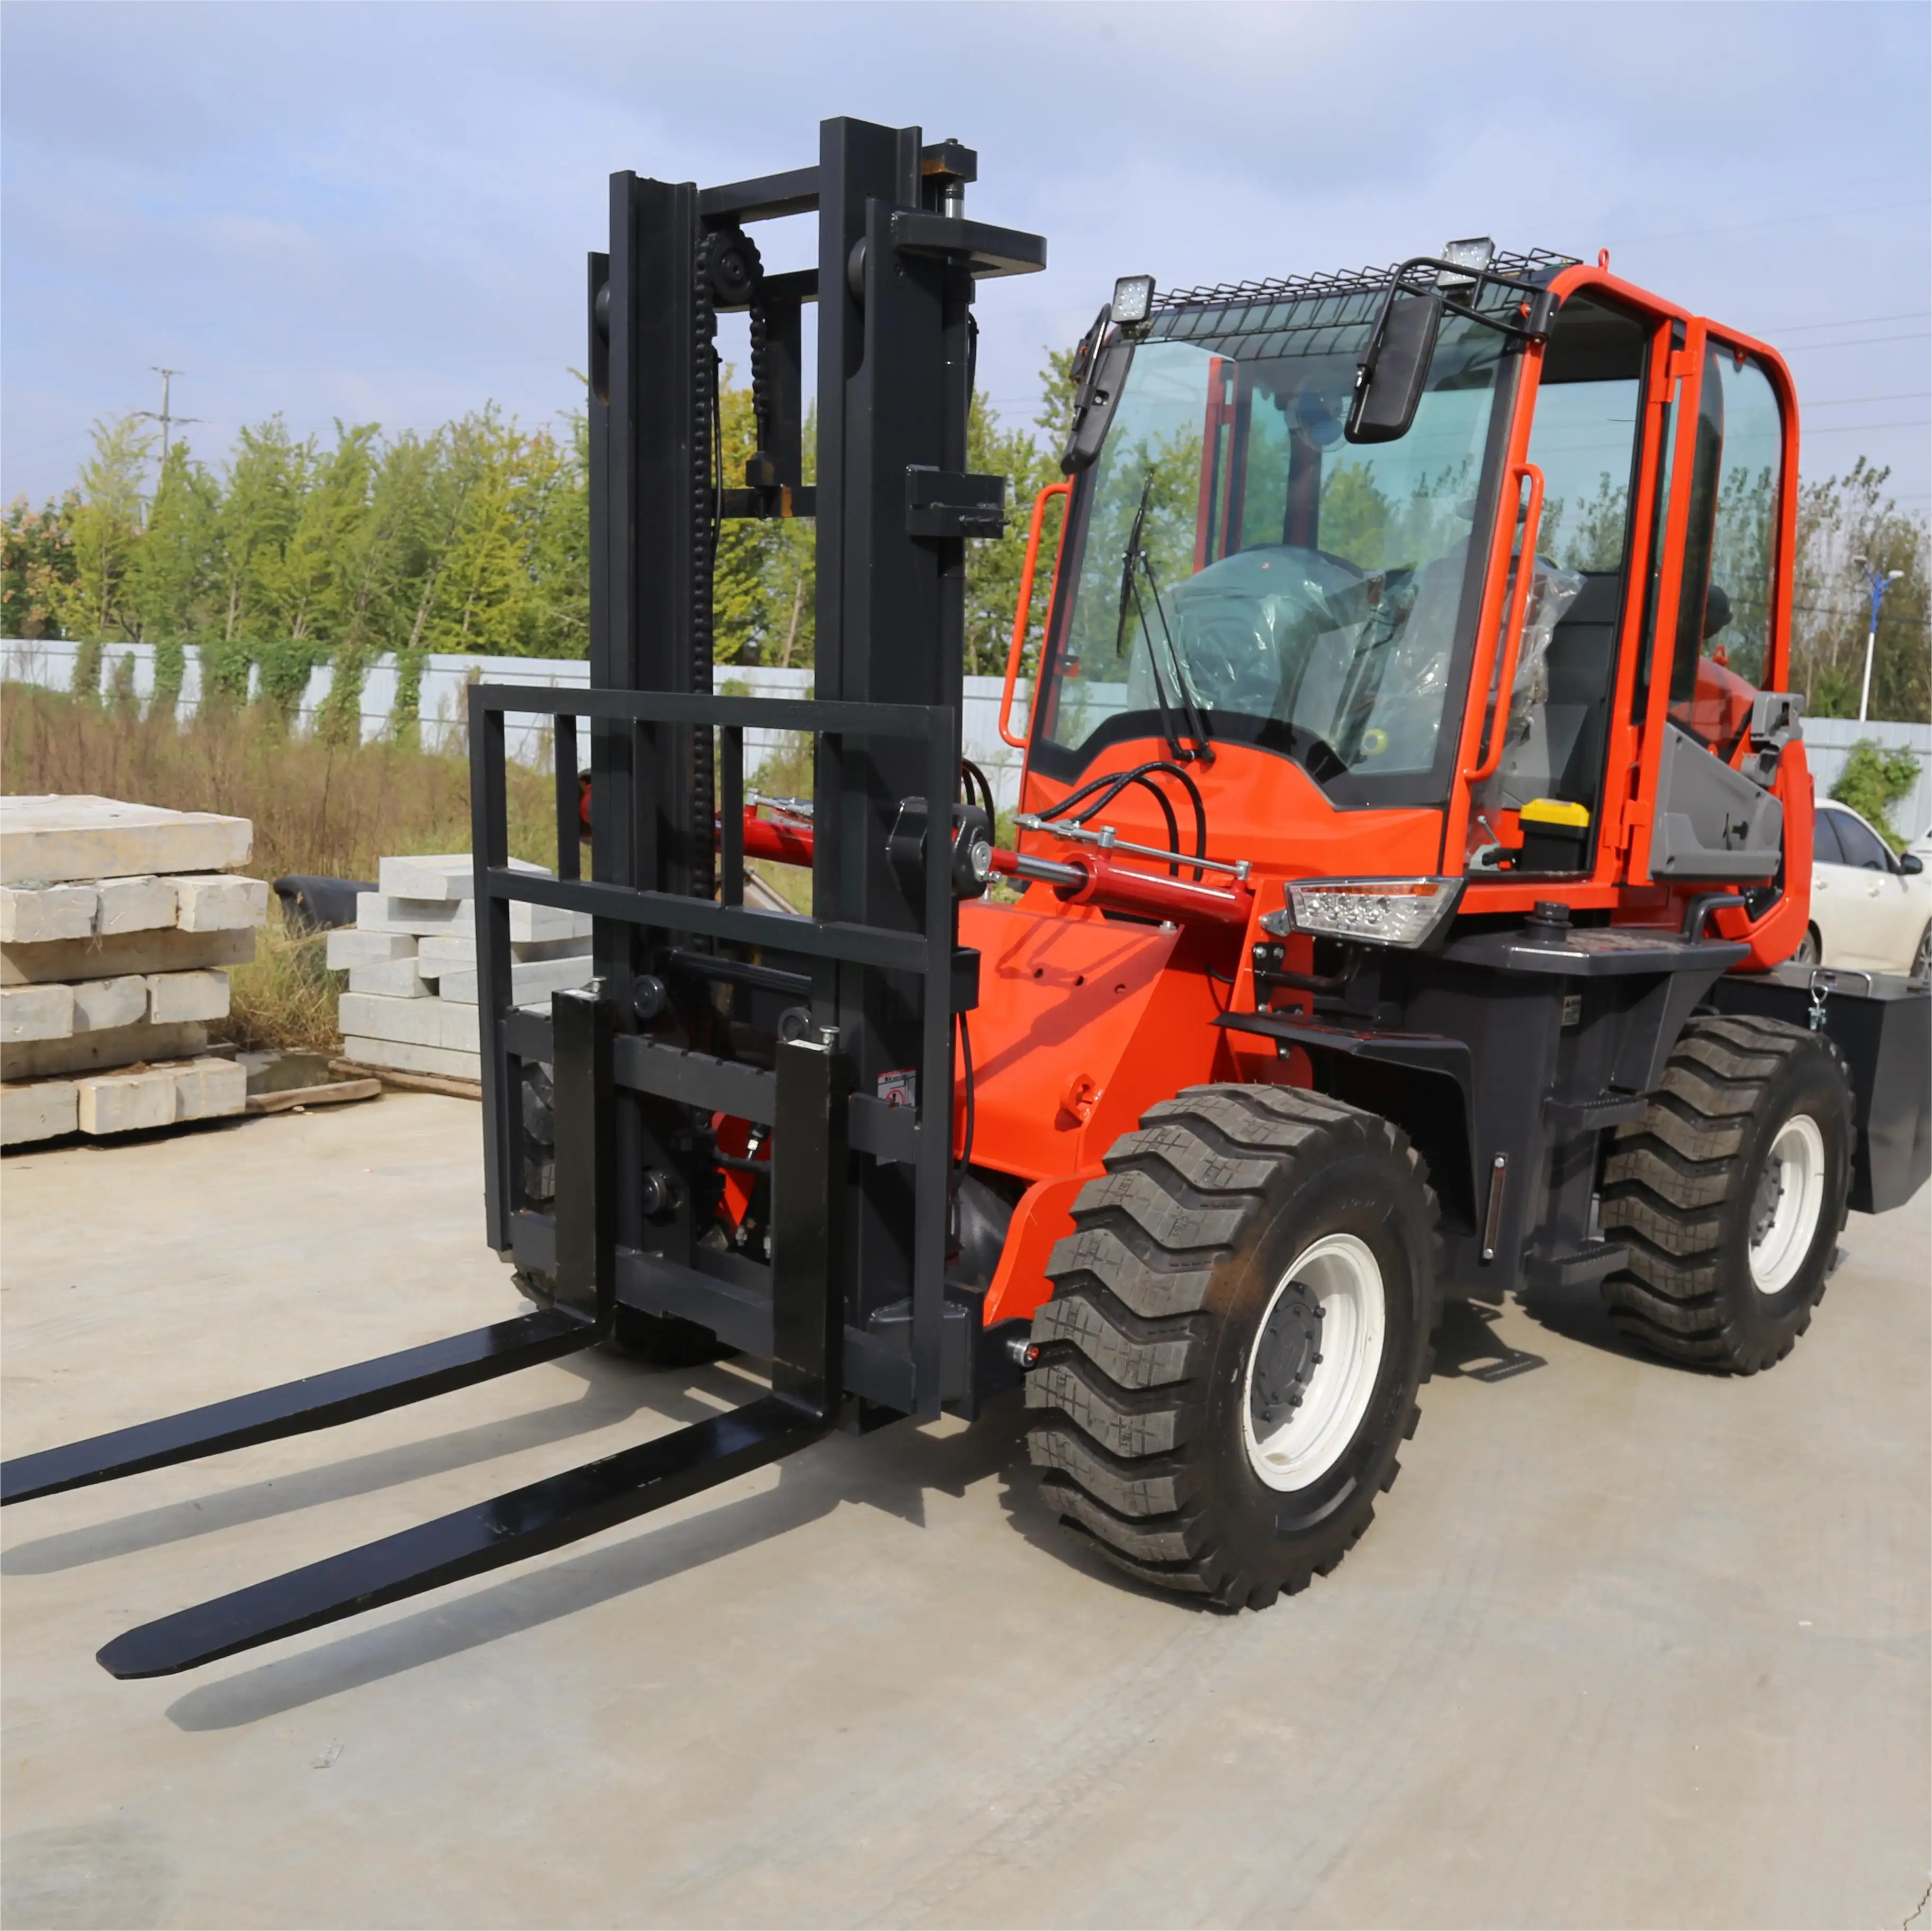 4x4 off road diesel forklift all terrain forklift 3ton 5ton lift Professional manufacture promotion price